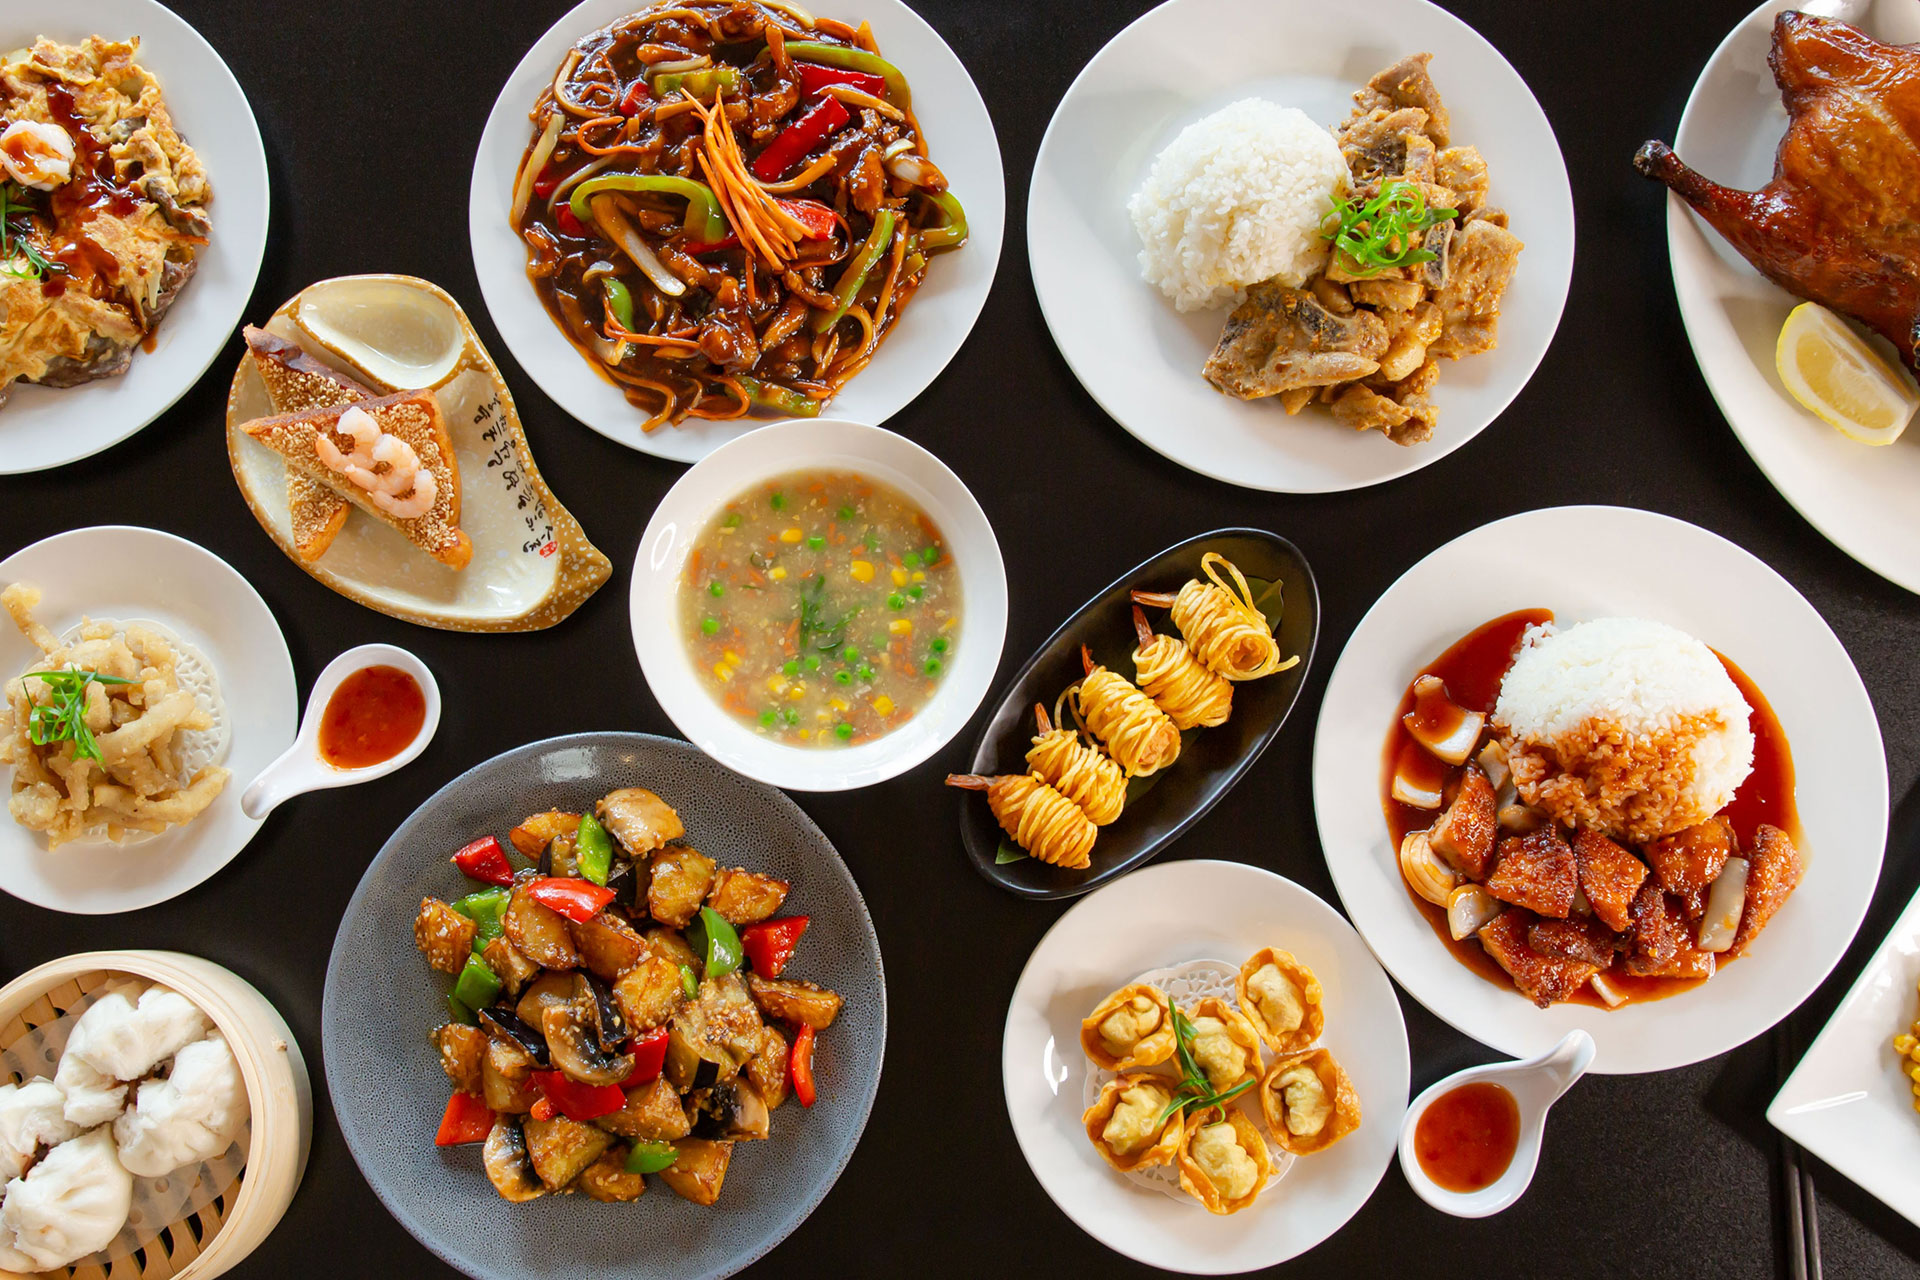 Viet World Kitchen - Dive in to explore Asian cooking and traditions